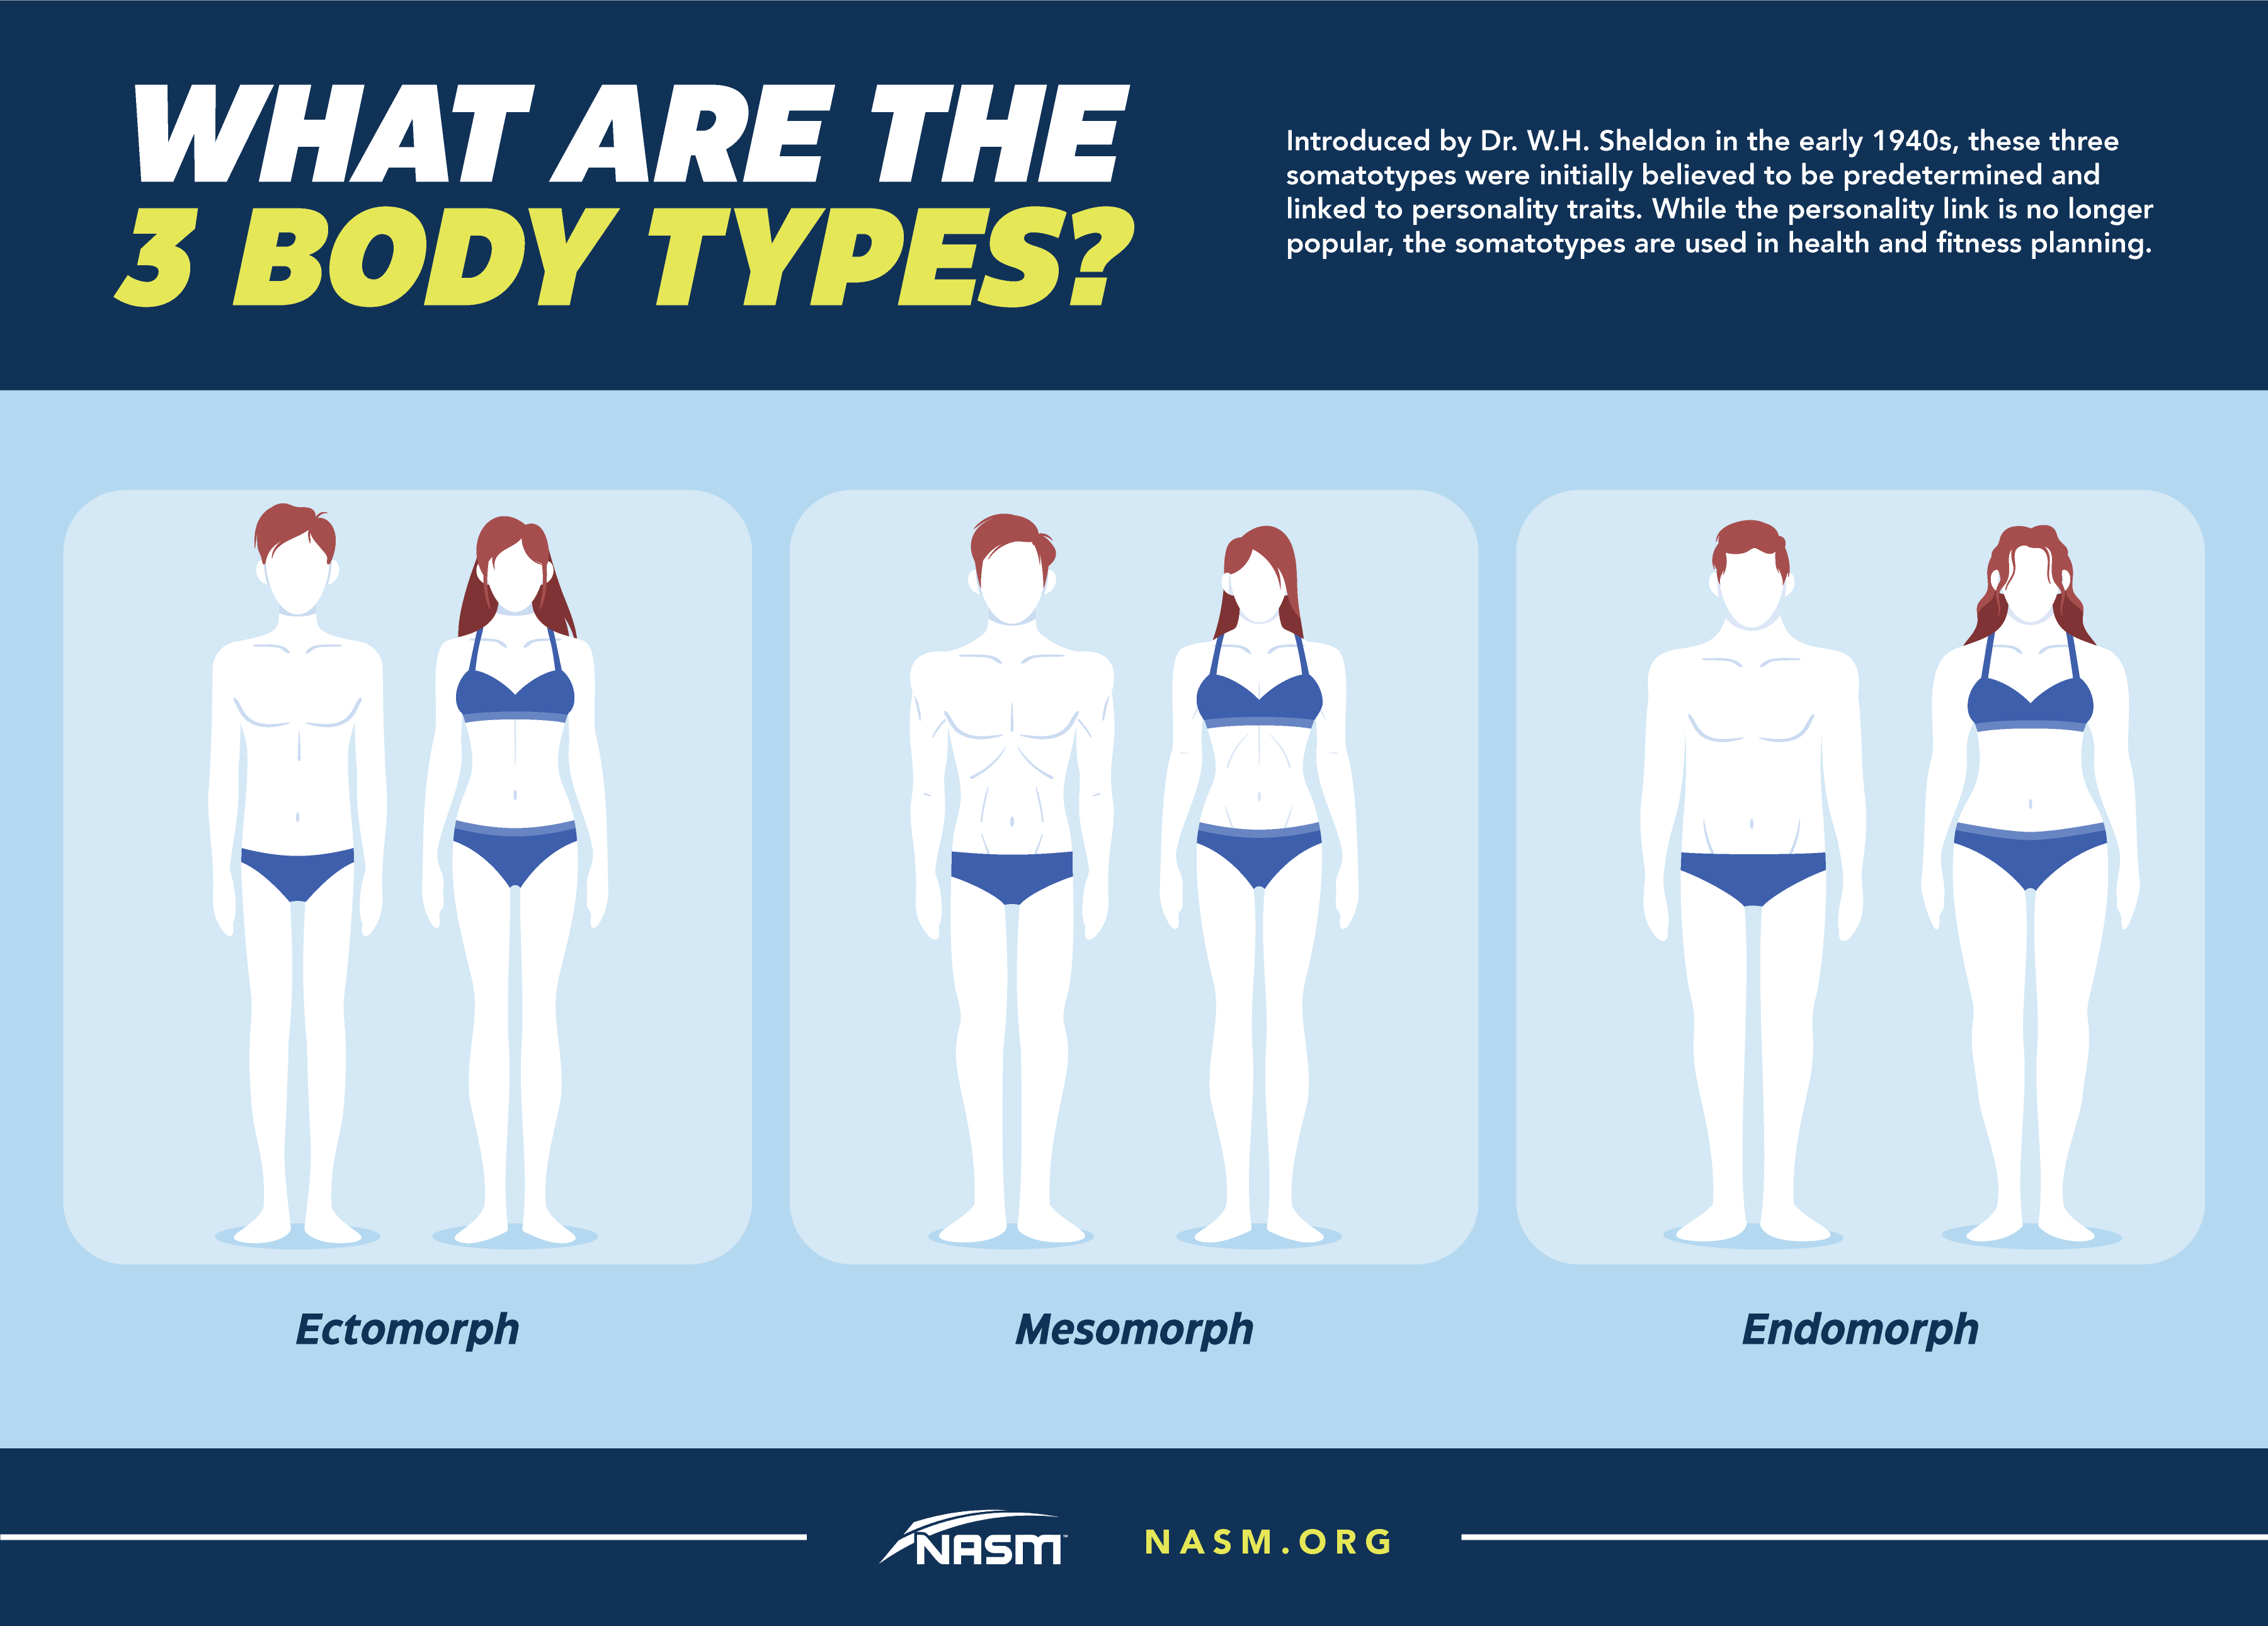 Endomorph, Ectomorph, or Mesomorph? How to exercise for your body type